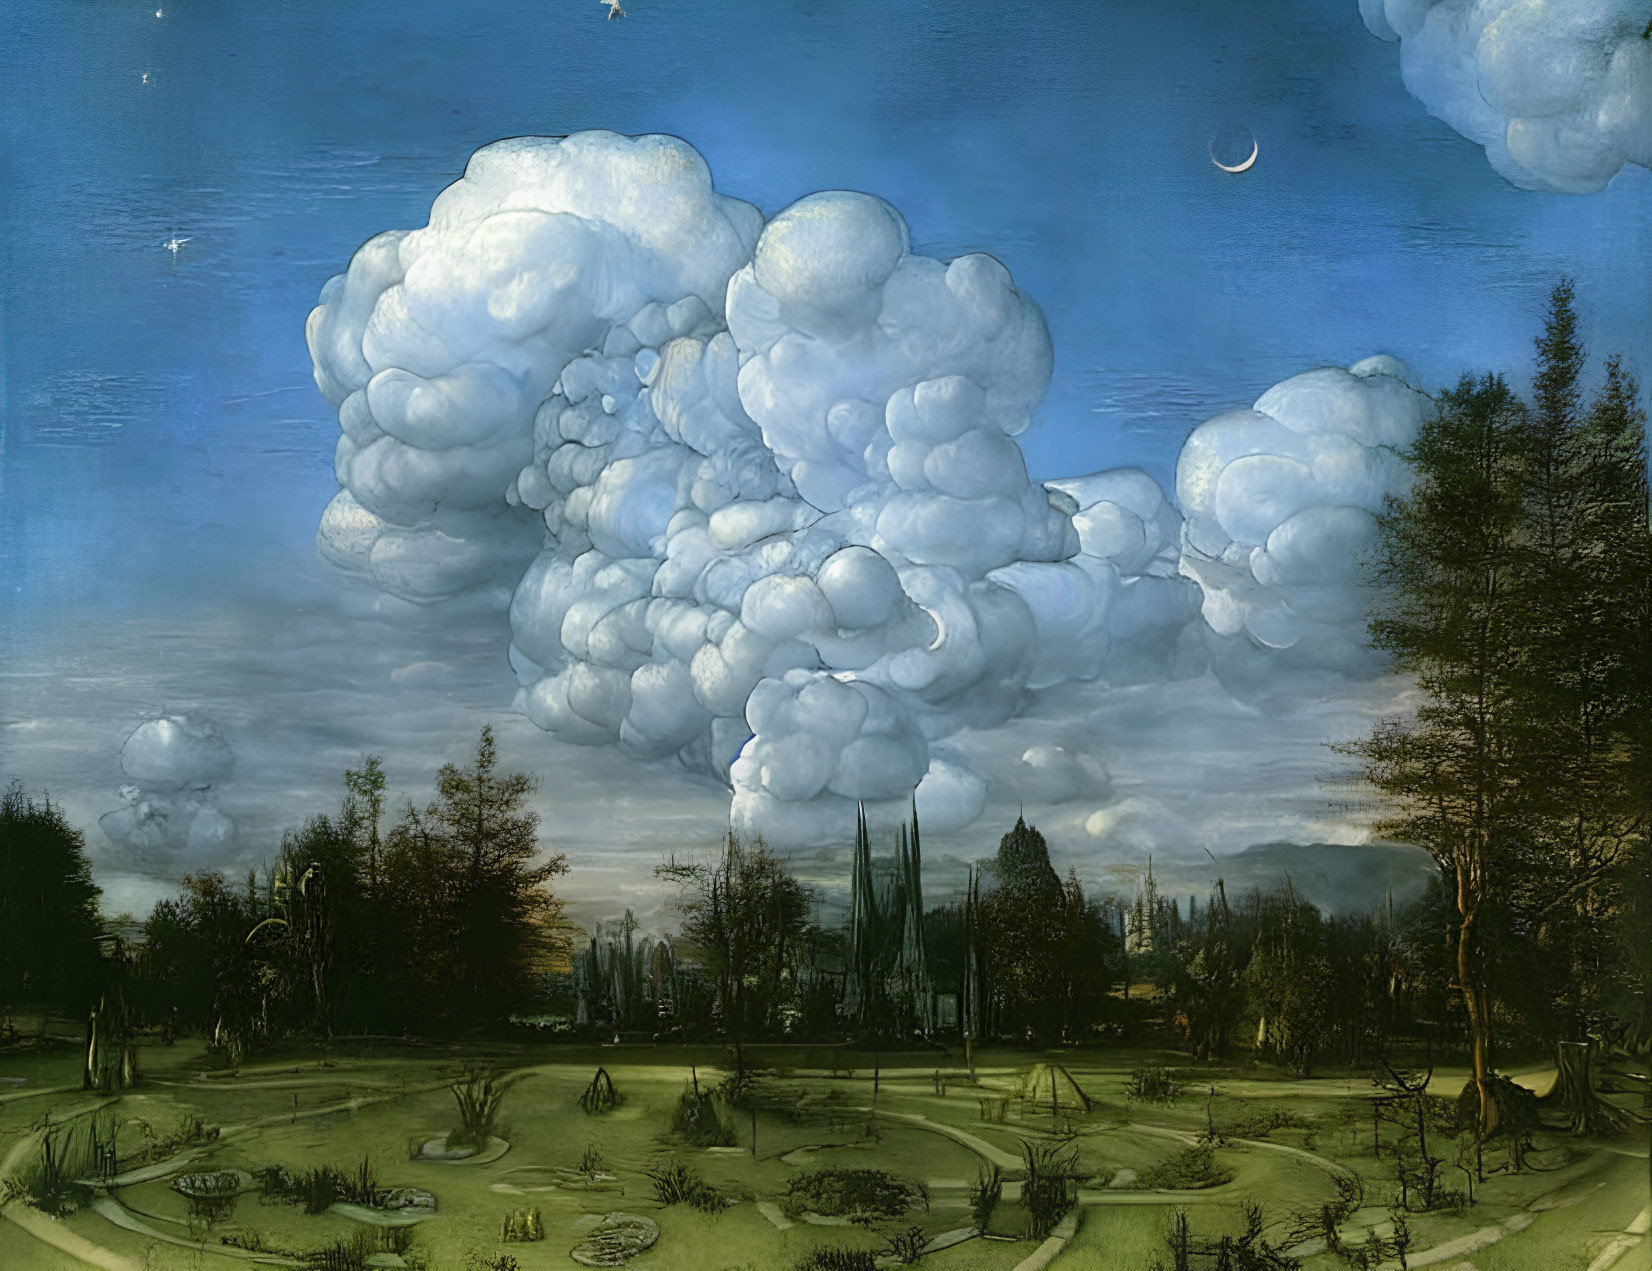 Surreal landscape painting with billowing clouds and detailed garden paths